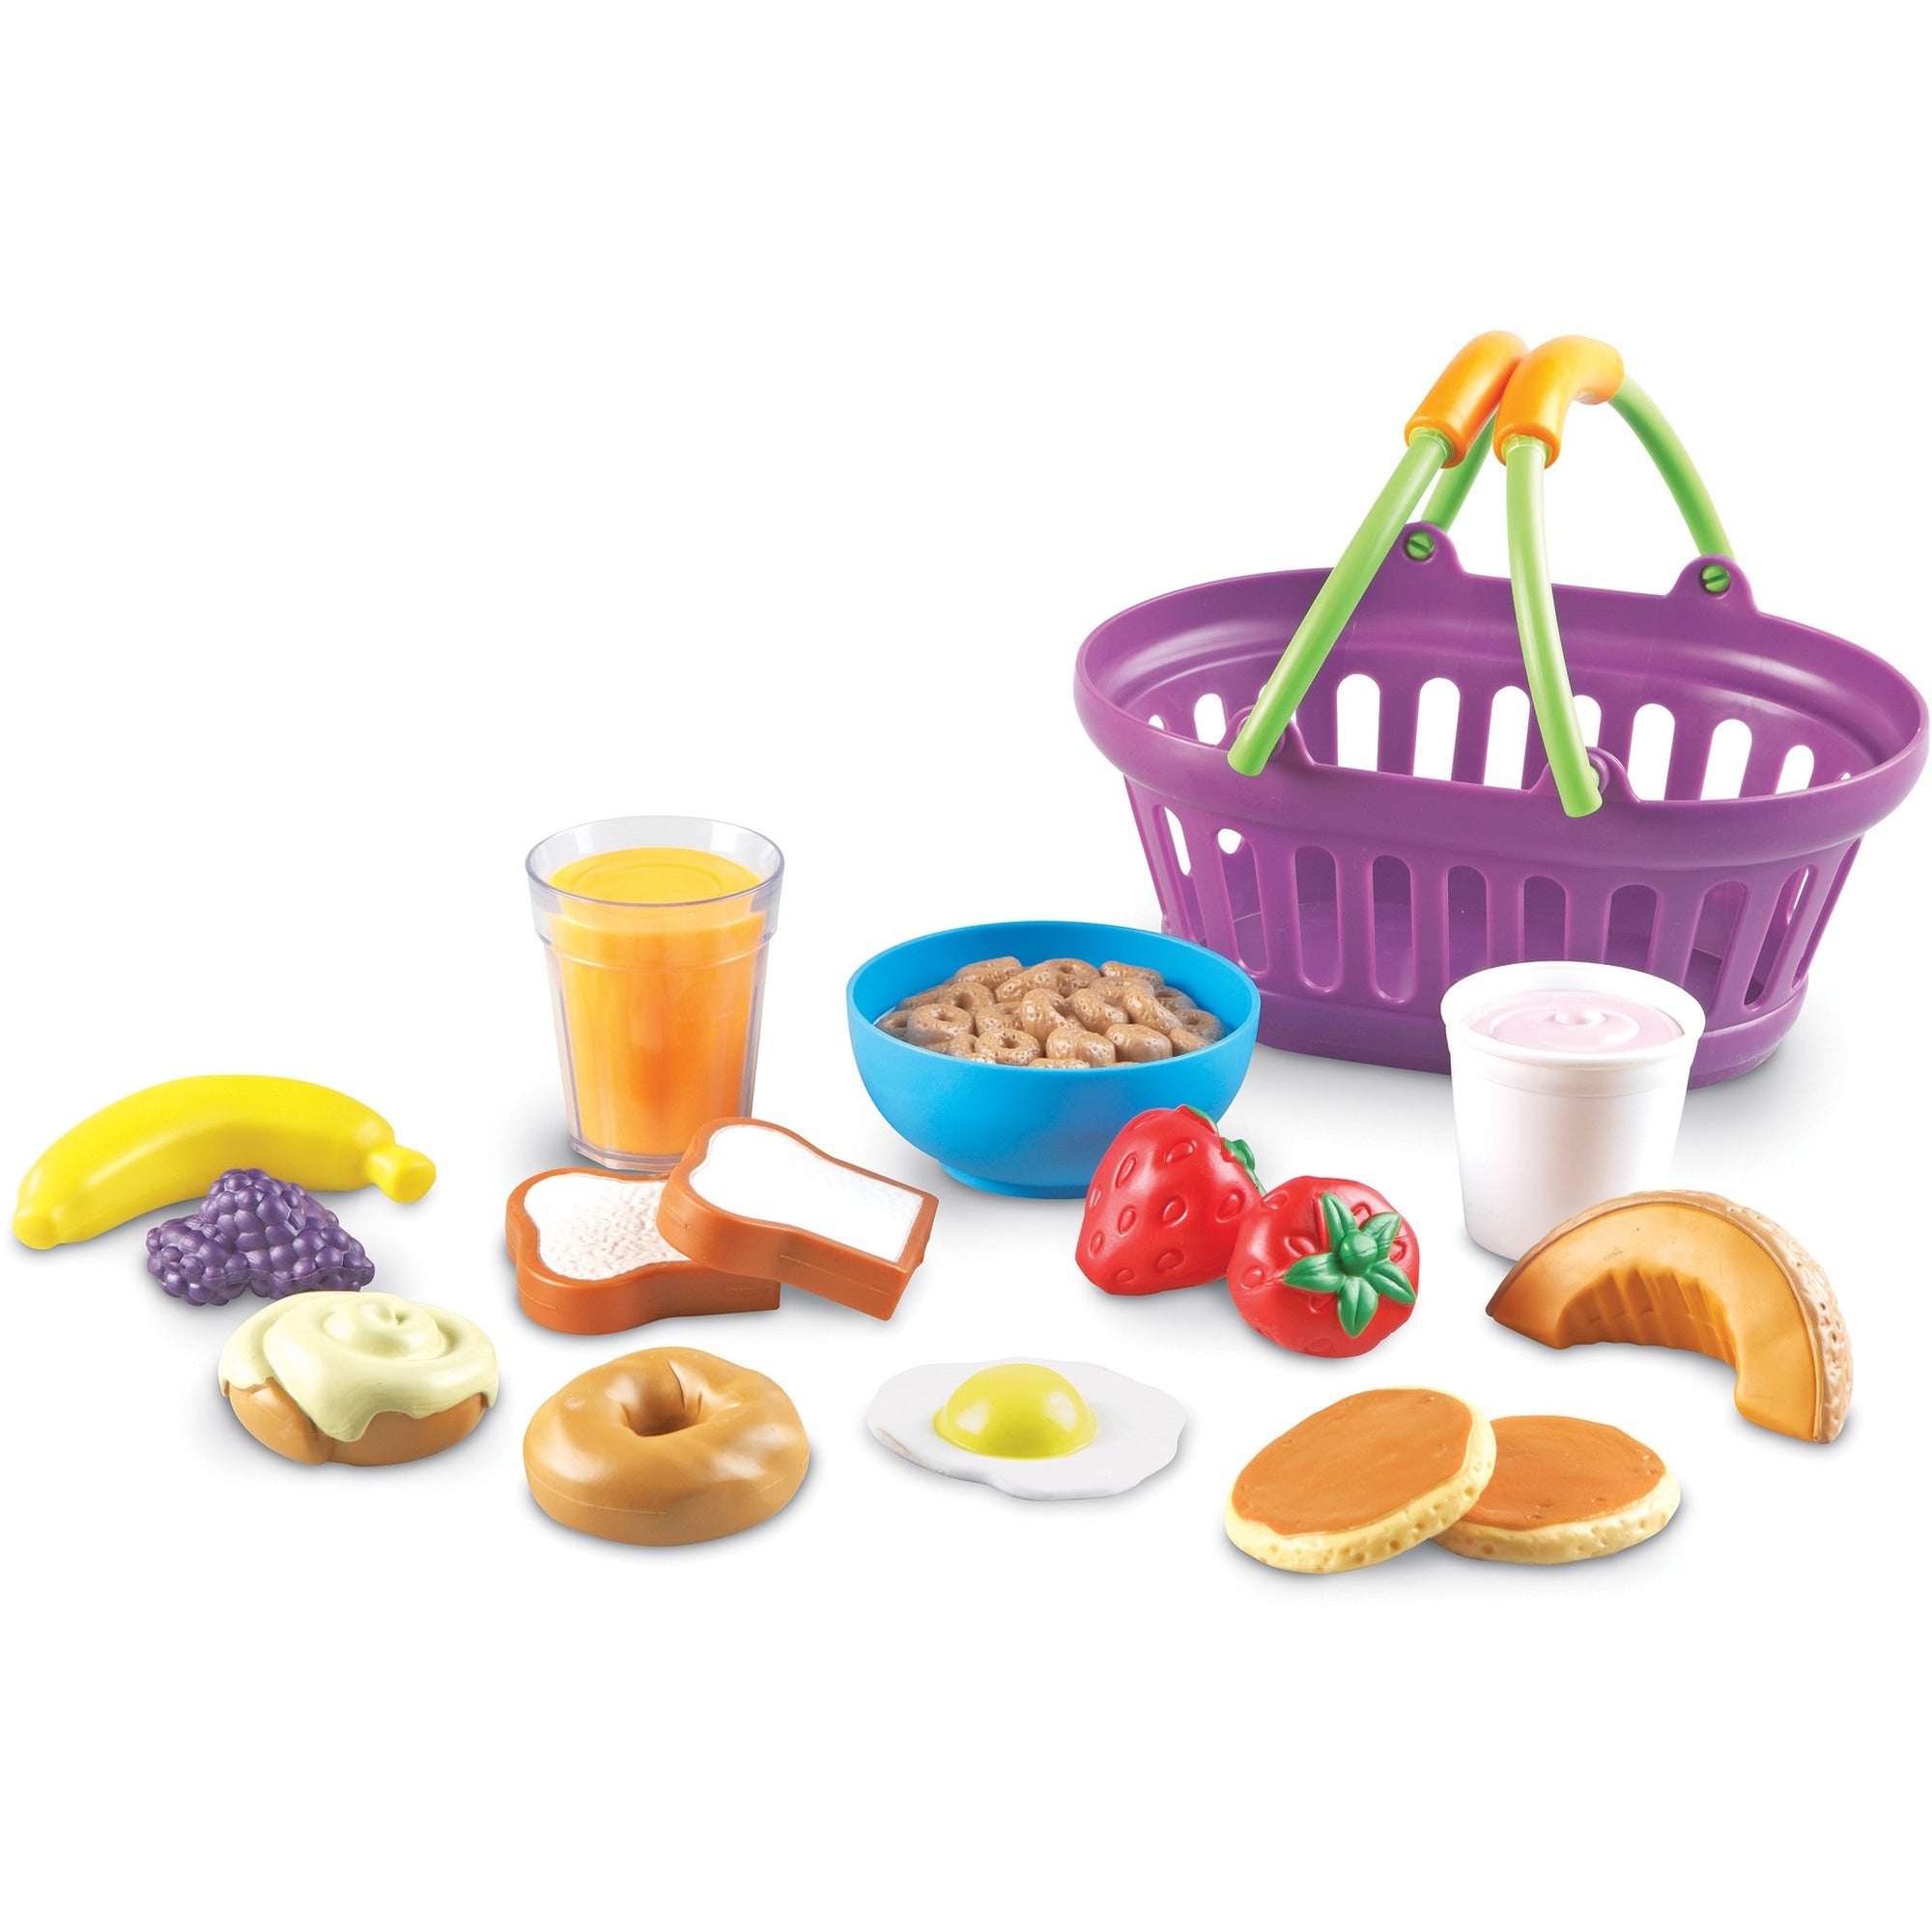 New Sprouts - Play Breakfast Basket - 1 / Set - 2 Year - Multi - Plastic - 